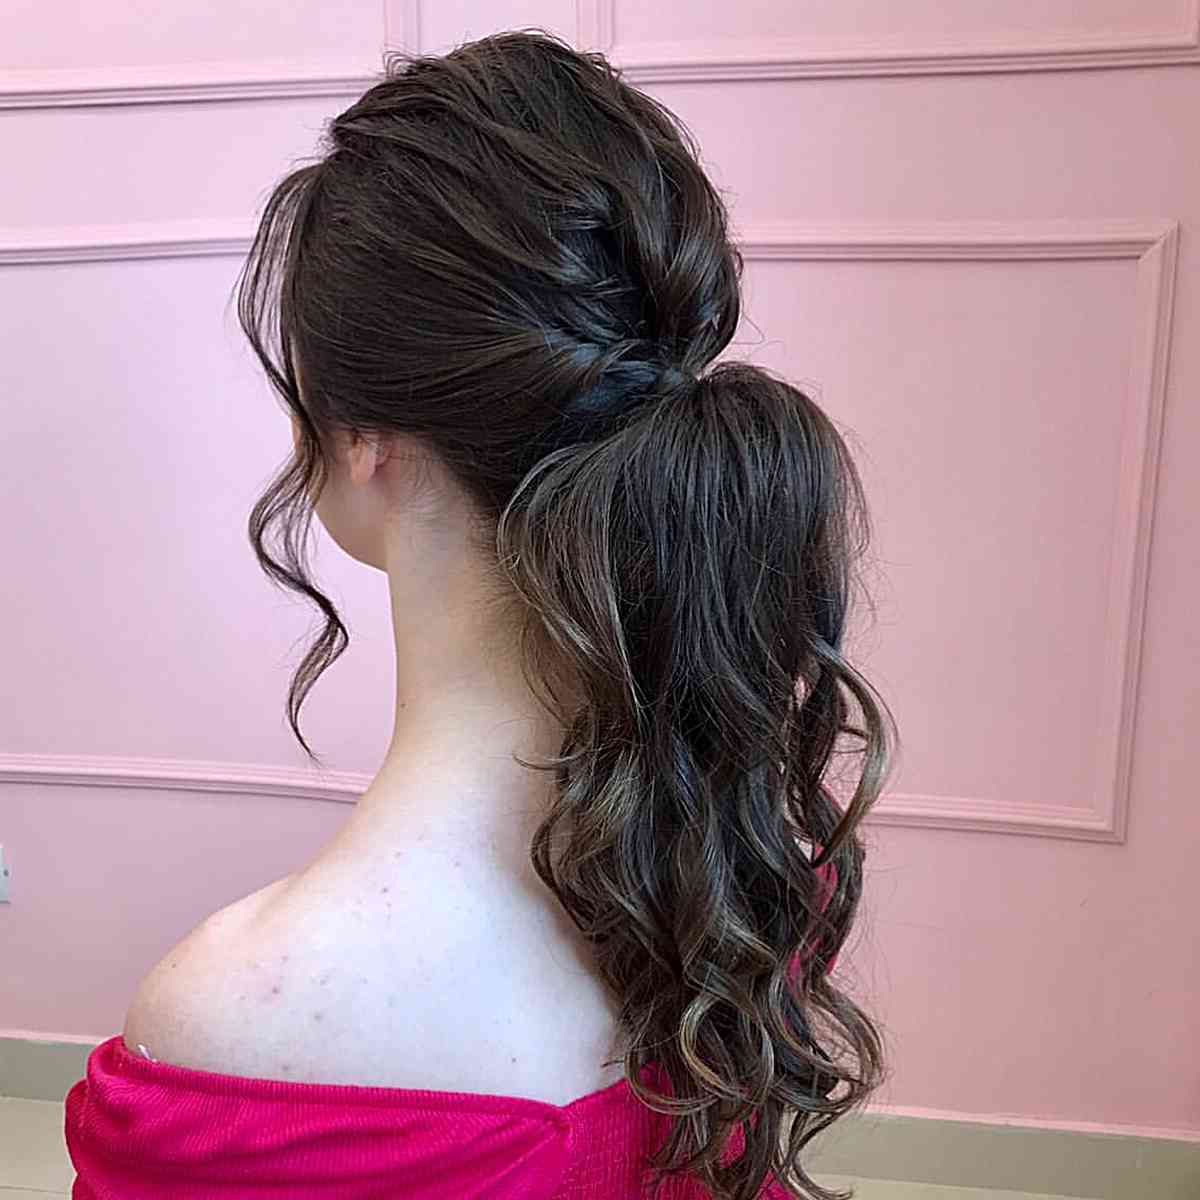 33 Cutest Prom Ponytail Hairstyles That Are Easy To Do! Within Most Recent Ponytail Updo Hairstyles For Medium Hair (Photo 26 of 36)